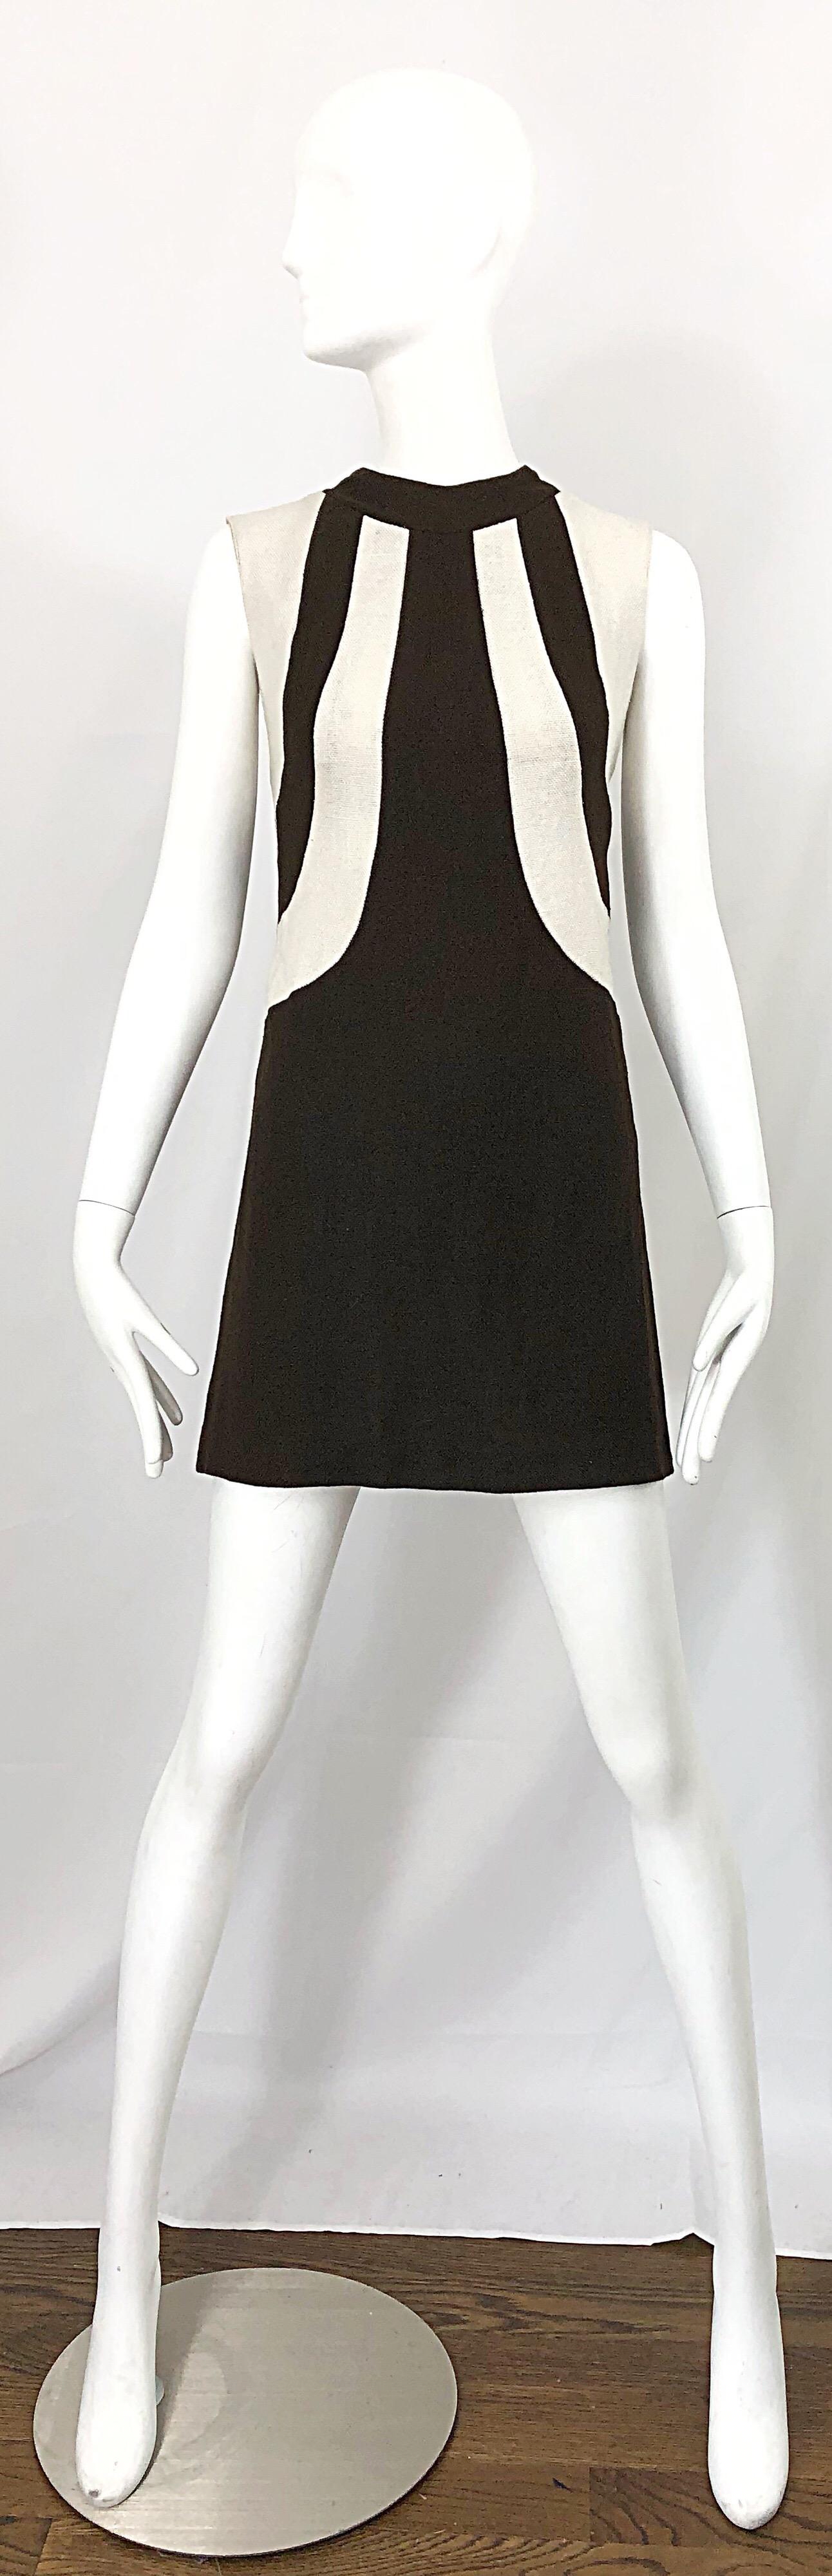 Chic 1960s chocolate brown and ivory linen mini shift dress! Avant Garde slimming print on the front. Great flattering fit that is easy to wear. Full metal zipper up the back with hook-and-eye closure. The 70s crochet fringe belt pictured is also